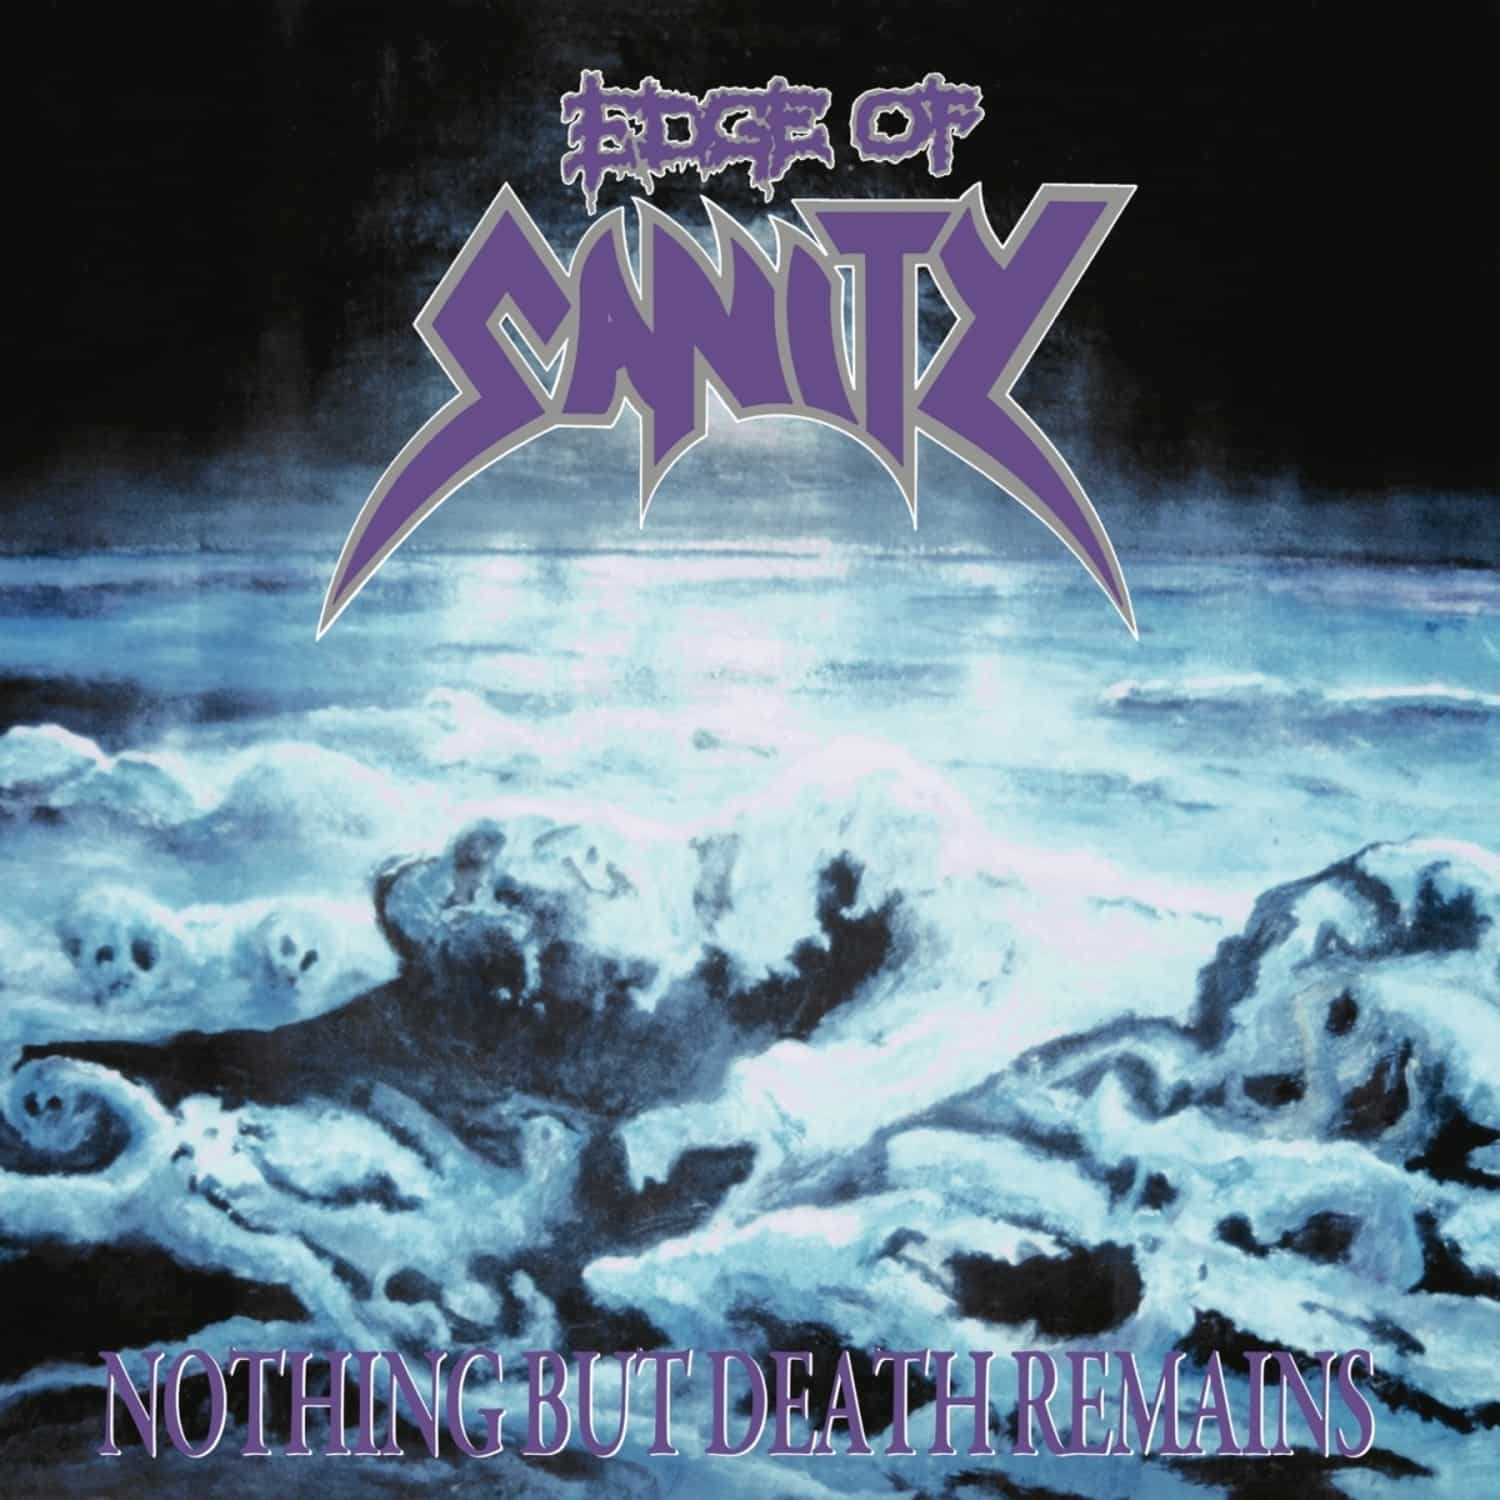 Edge Of Sanity - NOTHING BUT DEATH REMAINS 